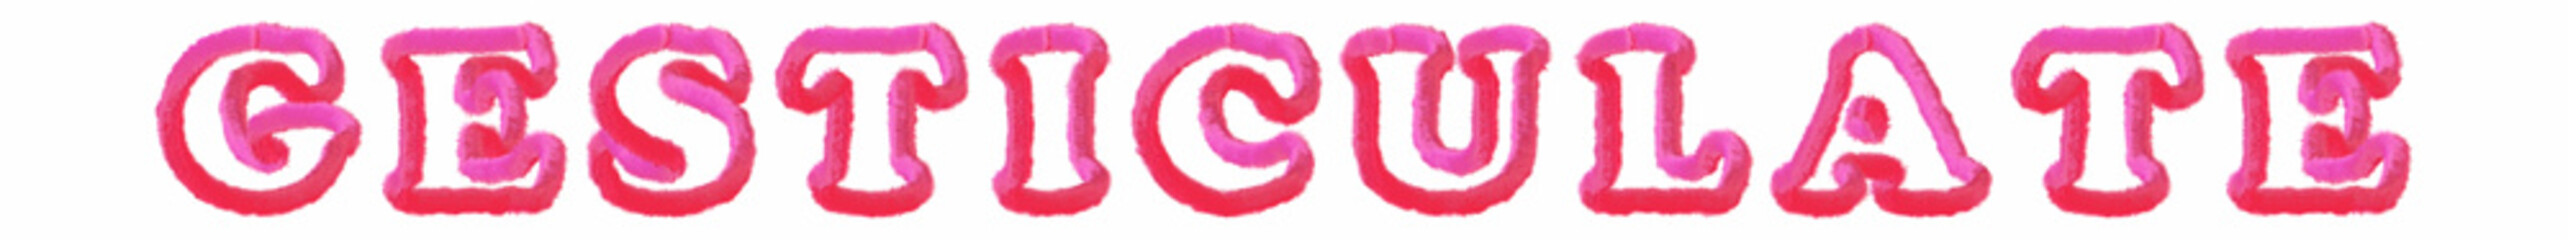 Gesticulate - clear pink text written on white background